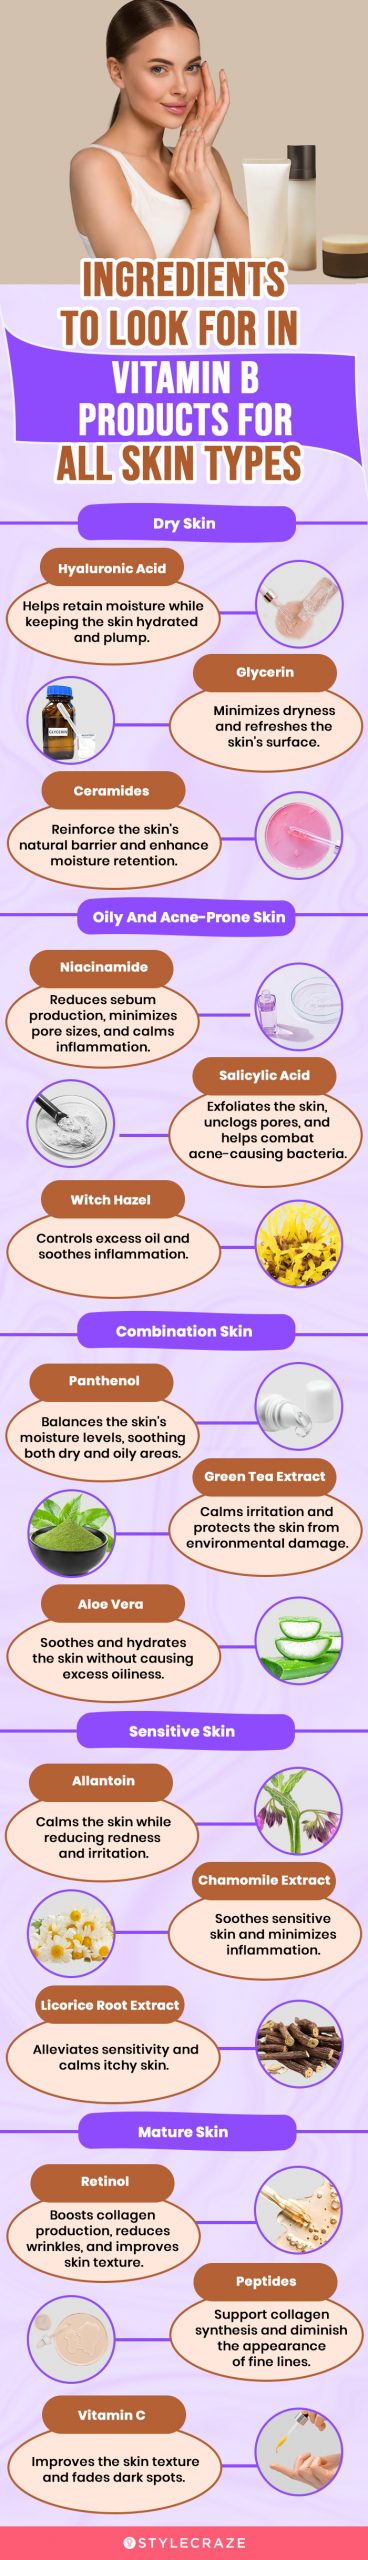 Ingredients To Look For In Vitamin B Products For All Skin Types (infographic)